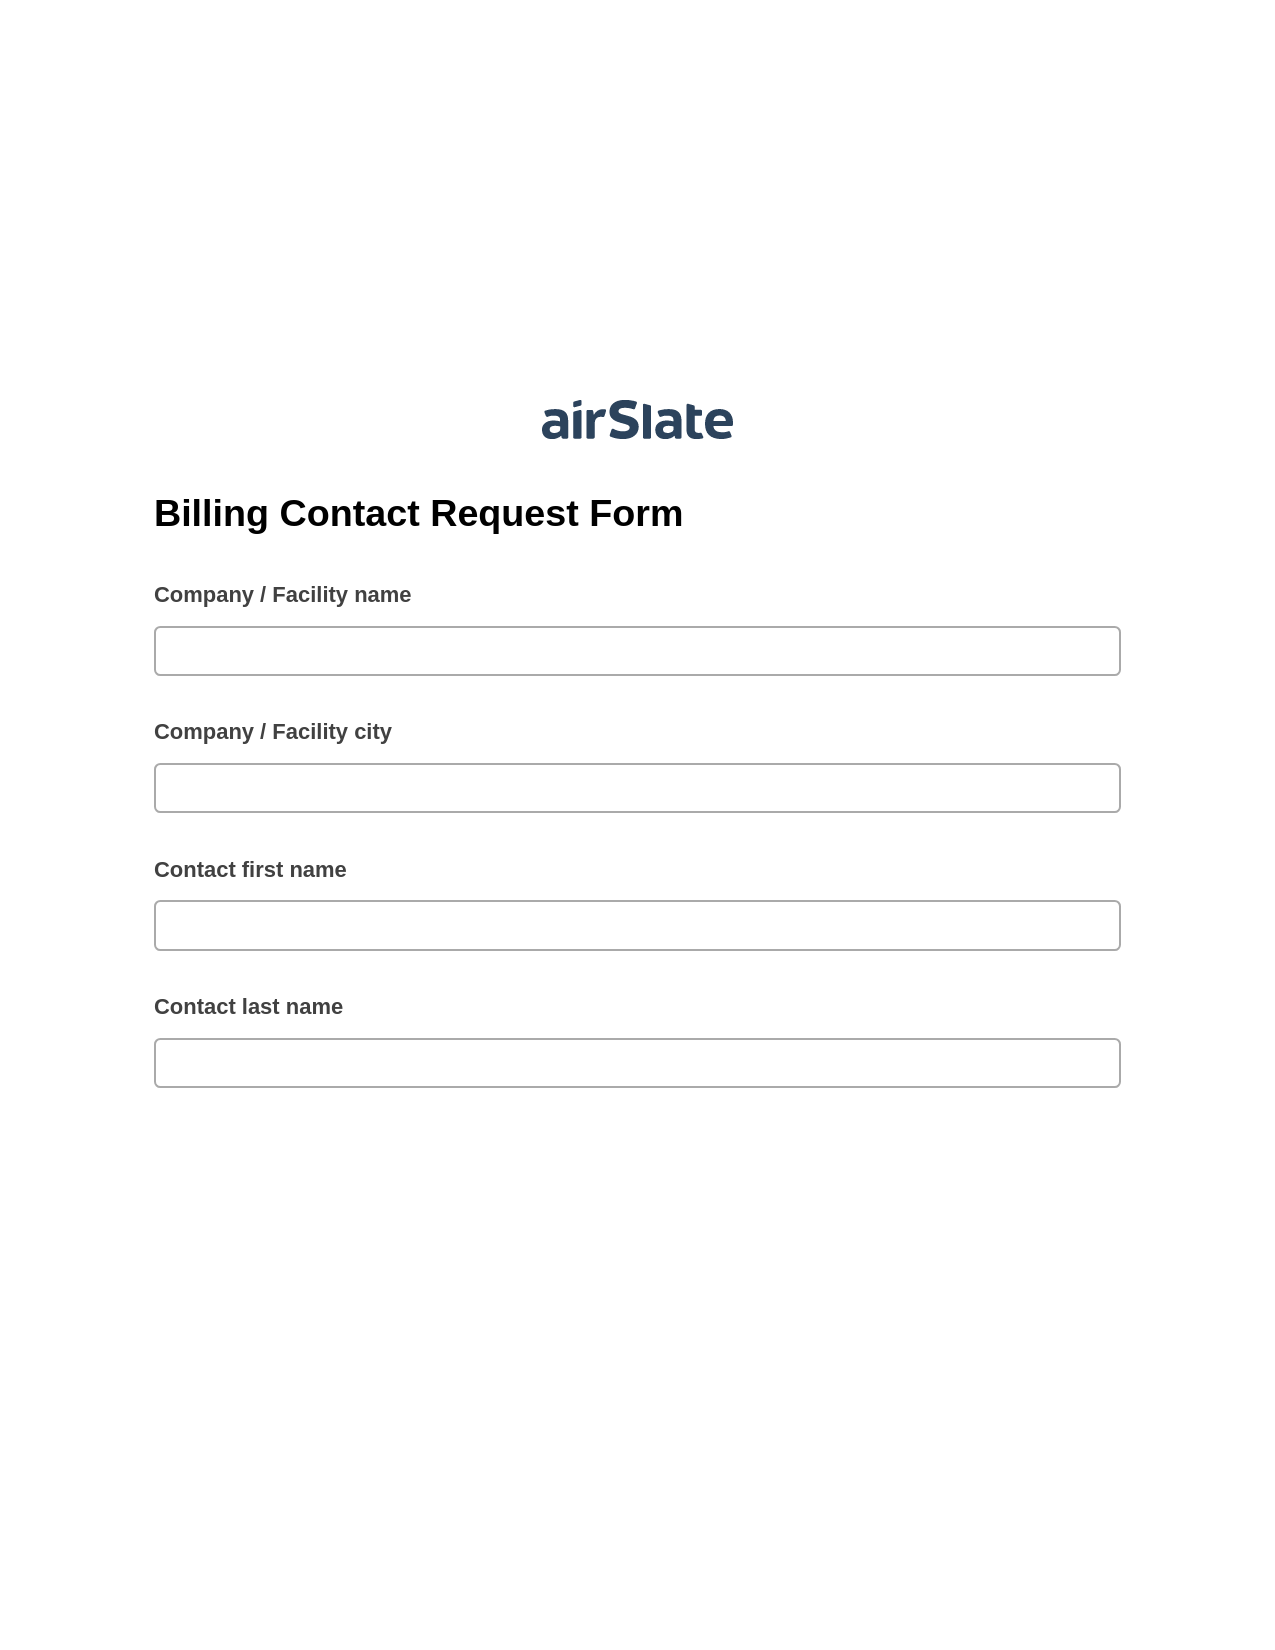 Billing Contact Request Form Pre-fill from Salesforce Record Bot, Create MS Dynamics 365 Records Bot, Post-finish Document Bot